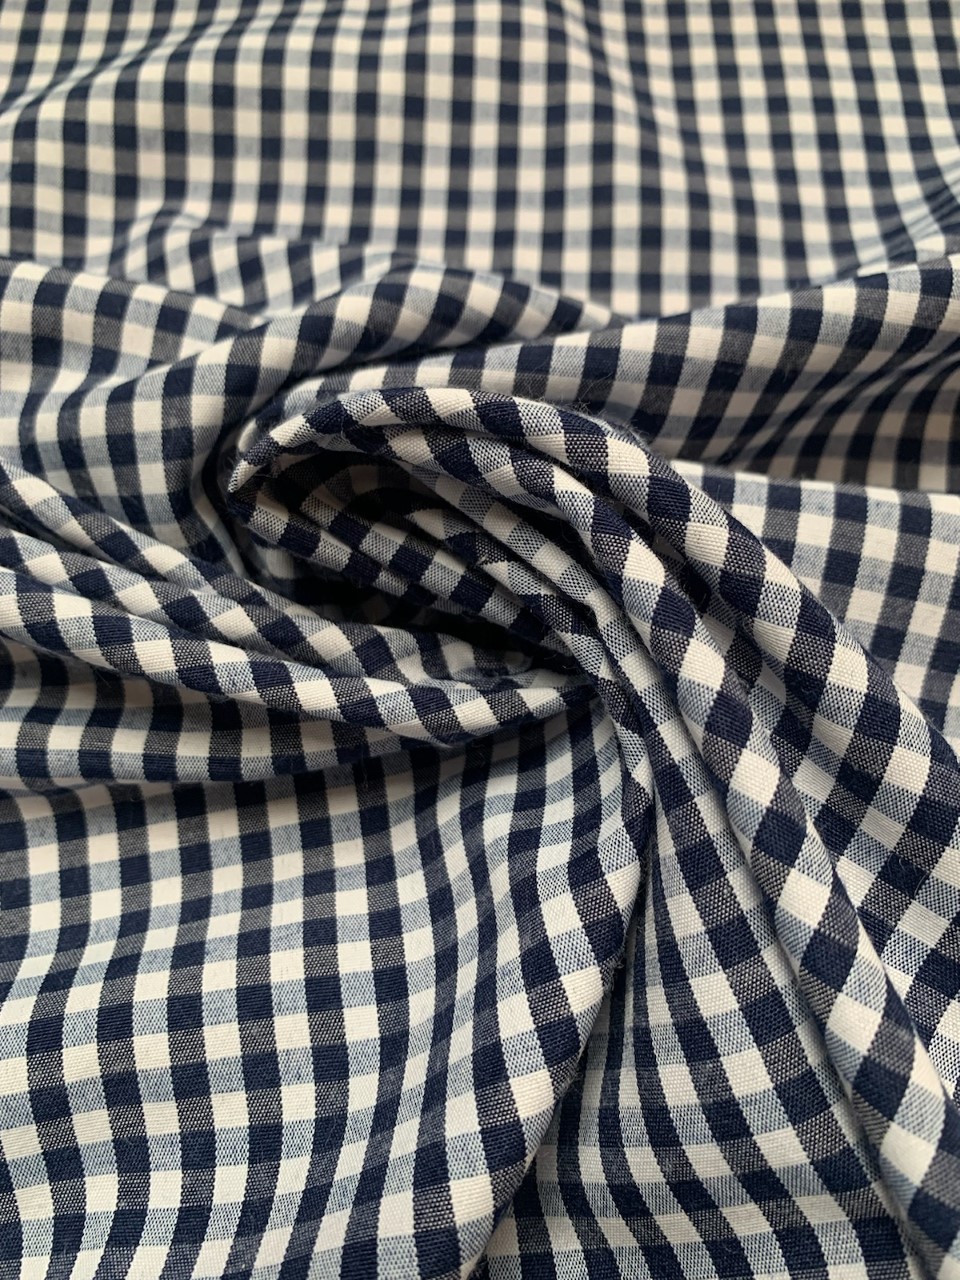 1/8" Navy Gingham Fabric 60" Wide By The Yard Poly Cotton Blend